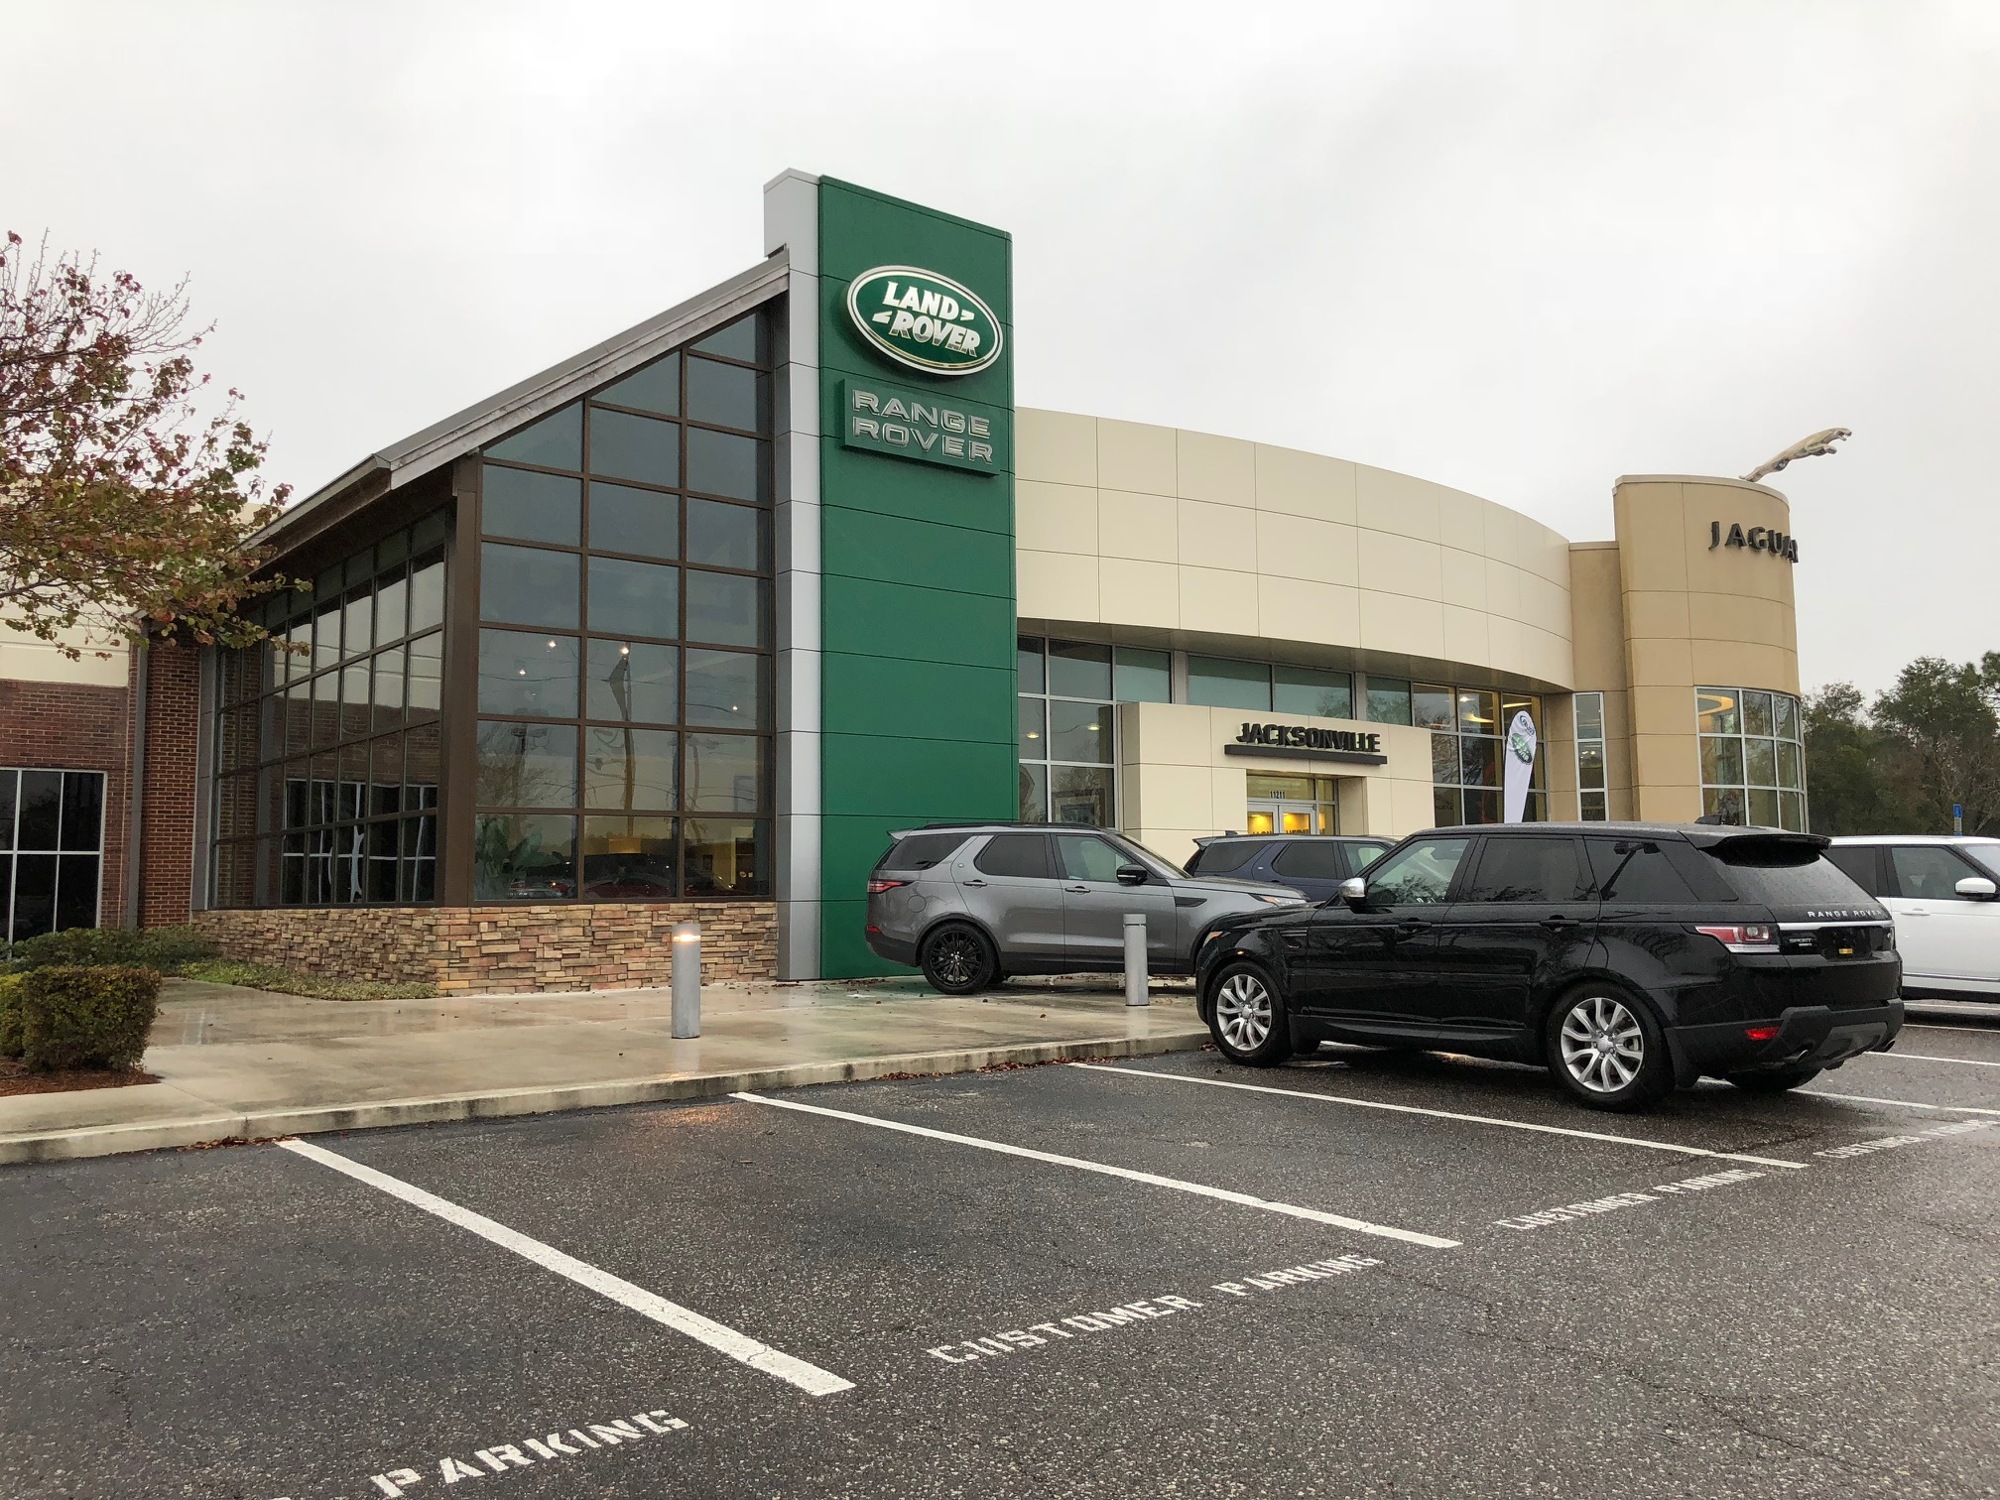 Fields Auto Group intends to build a new Jaguar Land Rover Jacksonville dealership next door to its existing location at 11211 Atlantic Blvd. and renovate the existing center for a Porsche sales and service dealership.